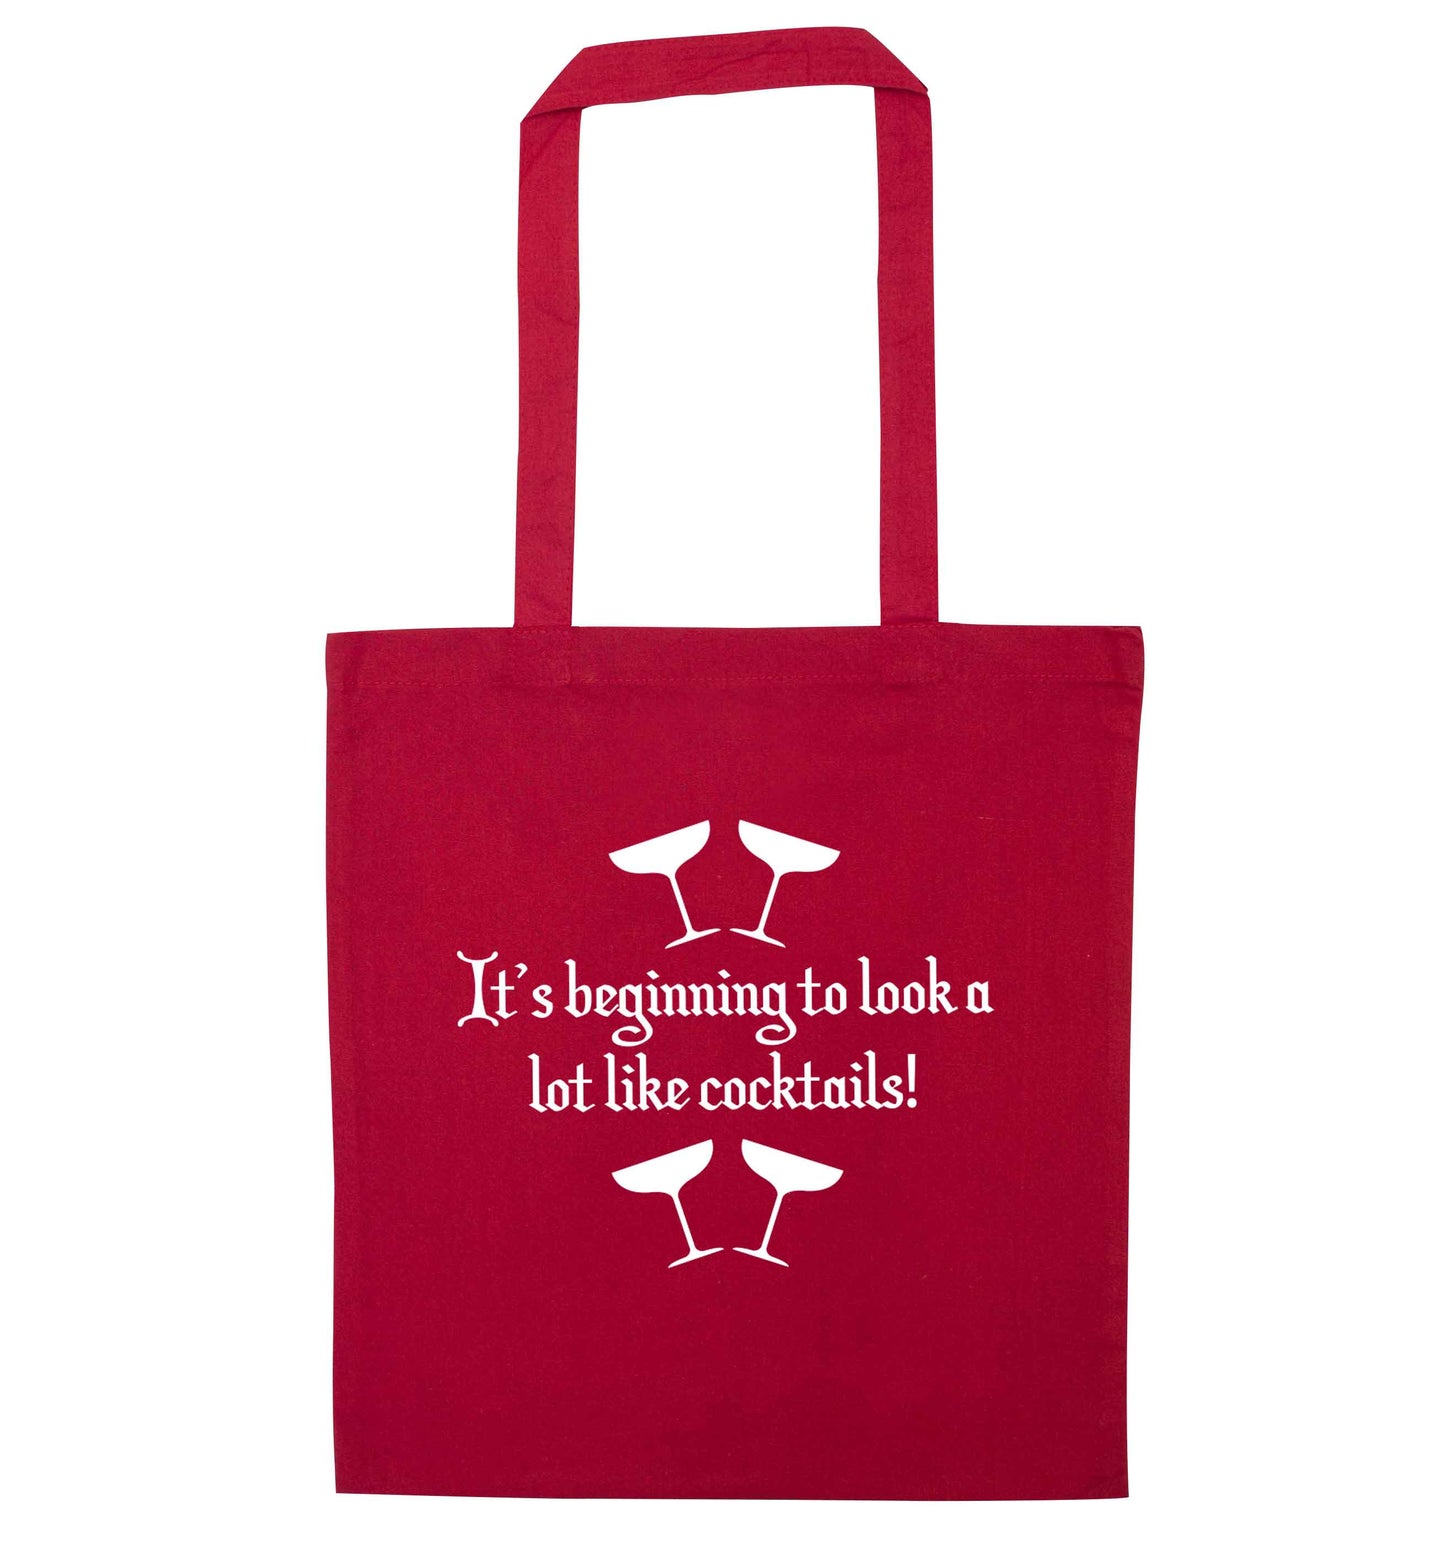 It's beginning to look a lot like cocktails red tote bag